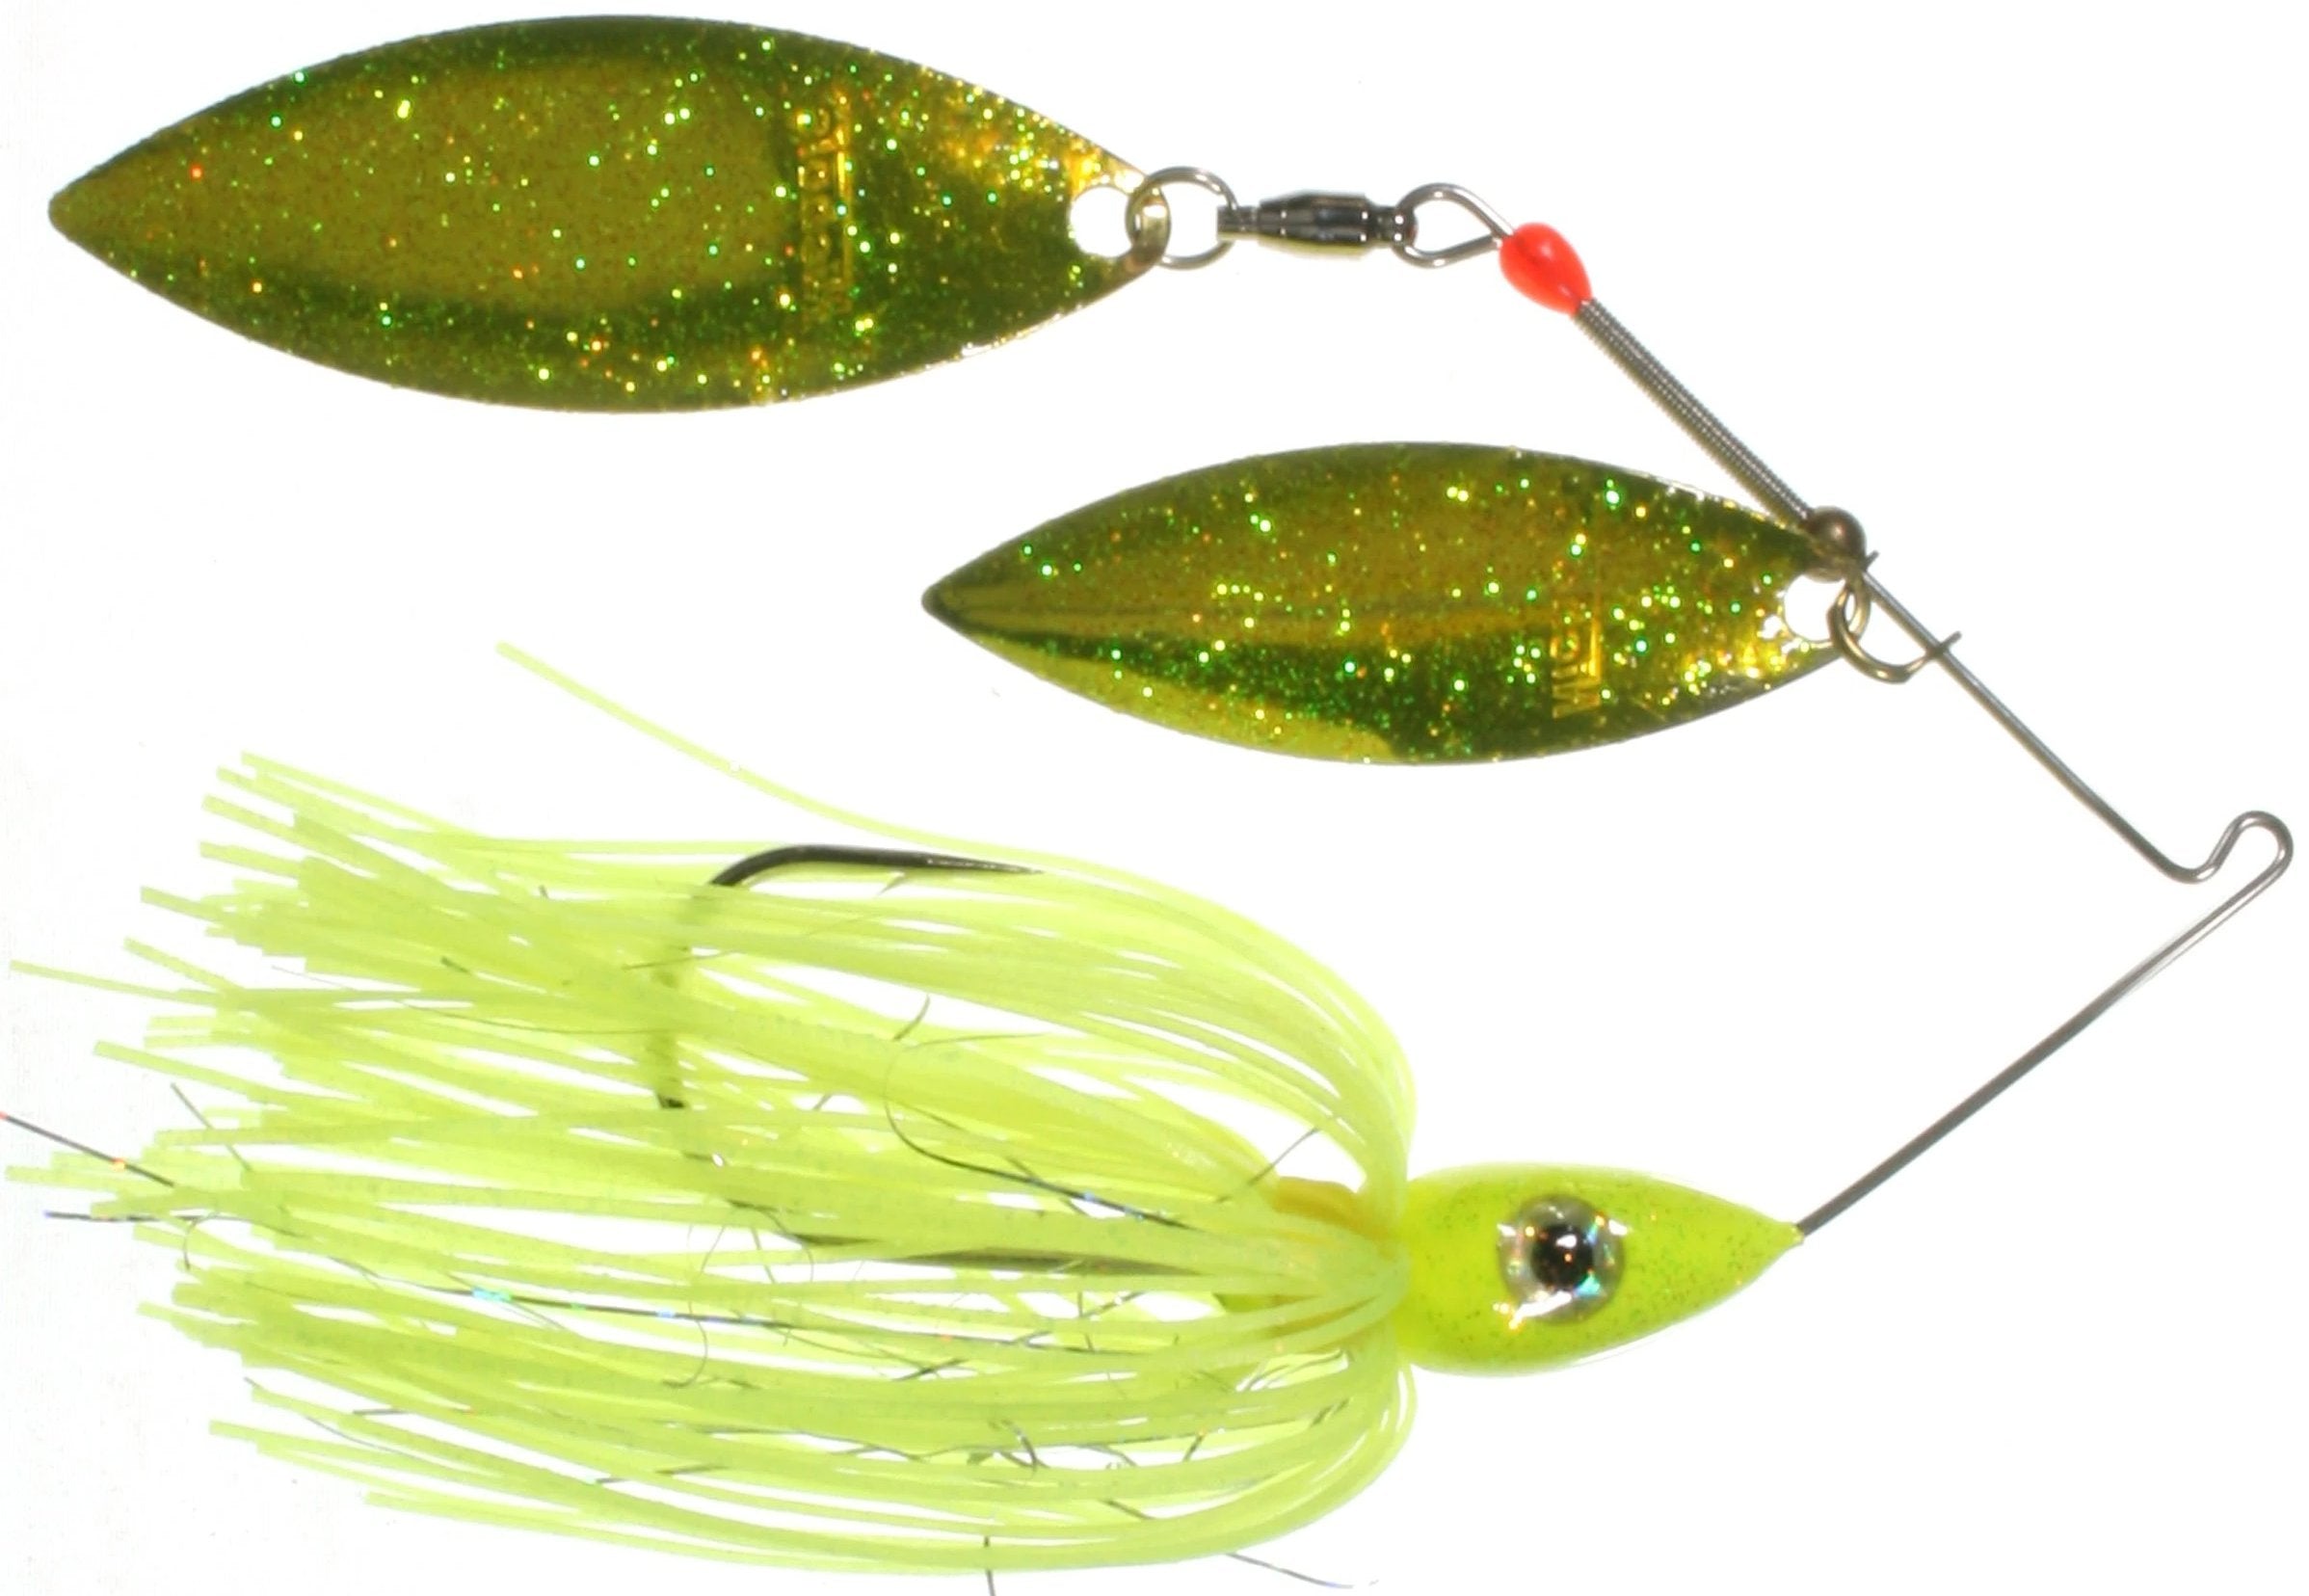 Nichols Lures Pulsator Metal Flake Double Willow Spinnerbait, Chartreuse, 1/2-Ounce